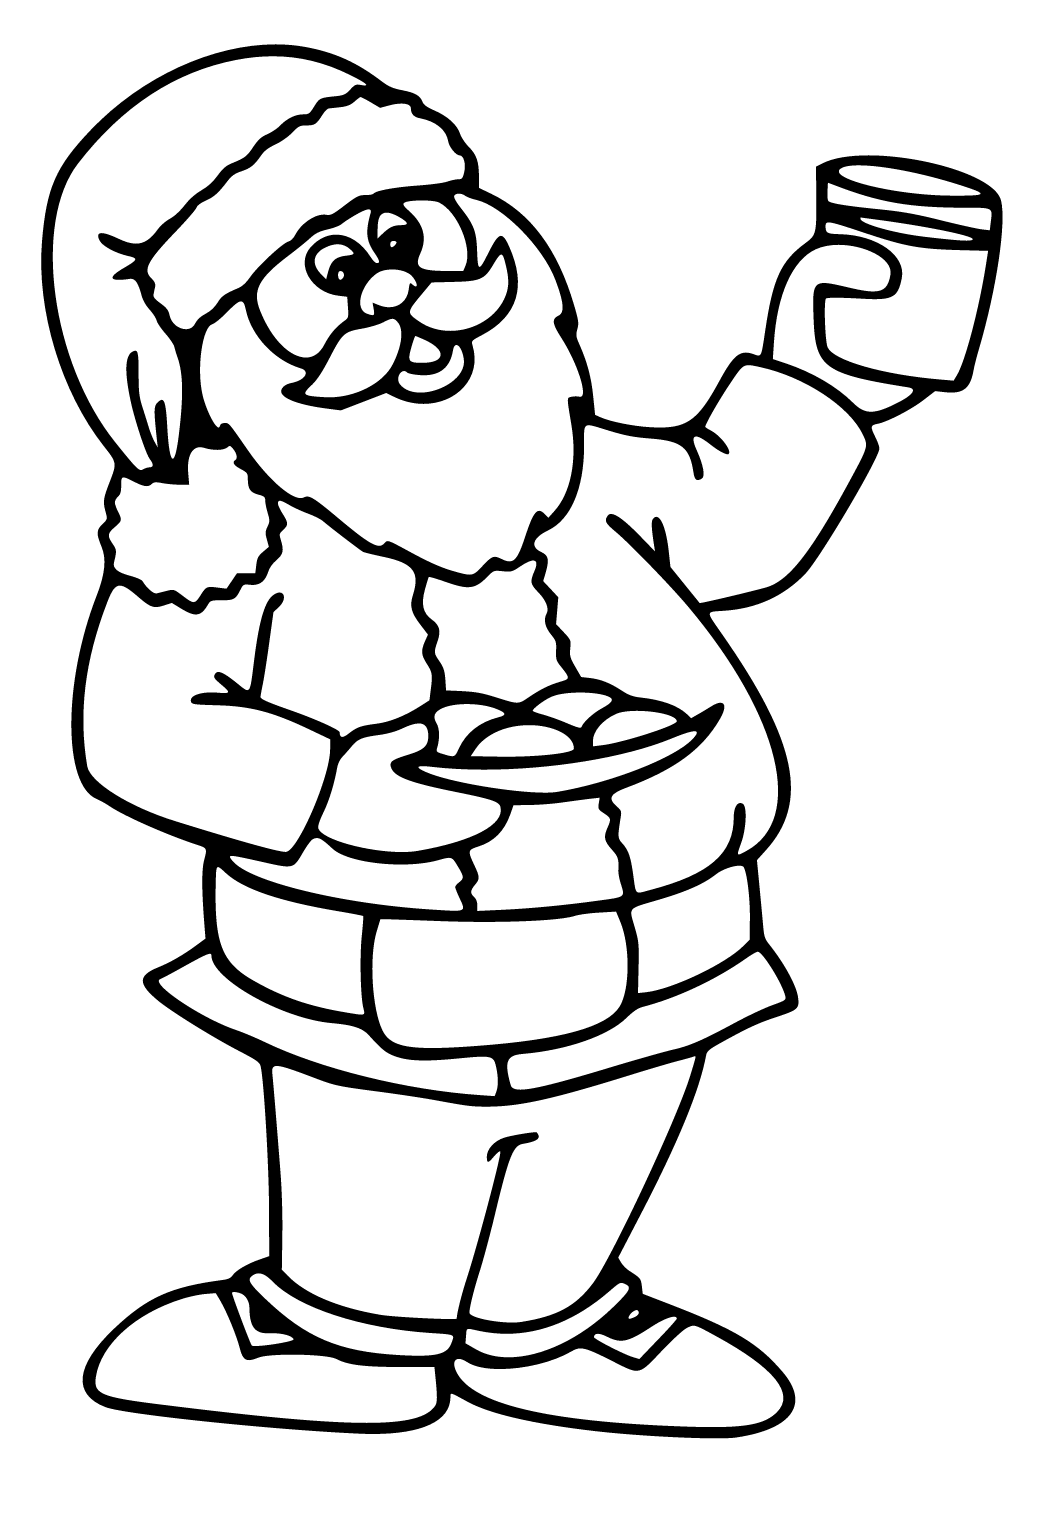 Free printable santa claus food coloring page for adults and kids